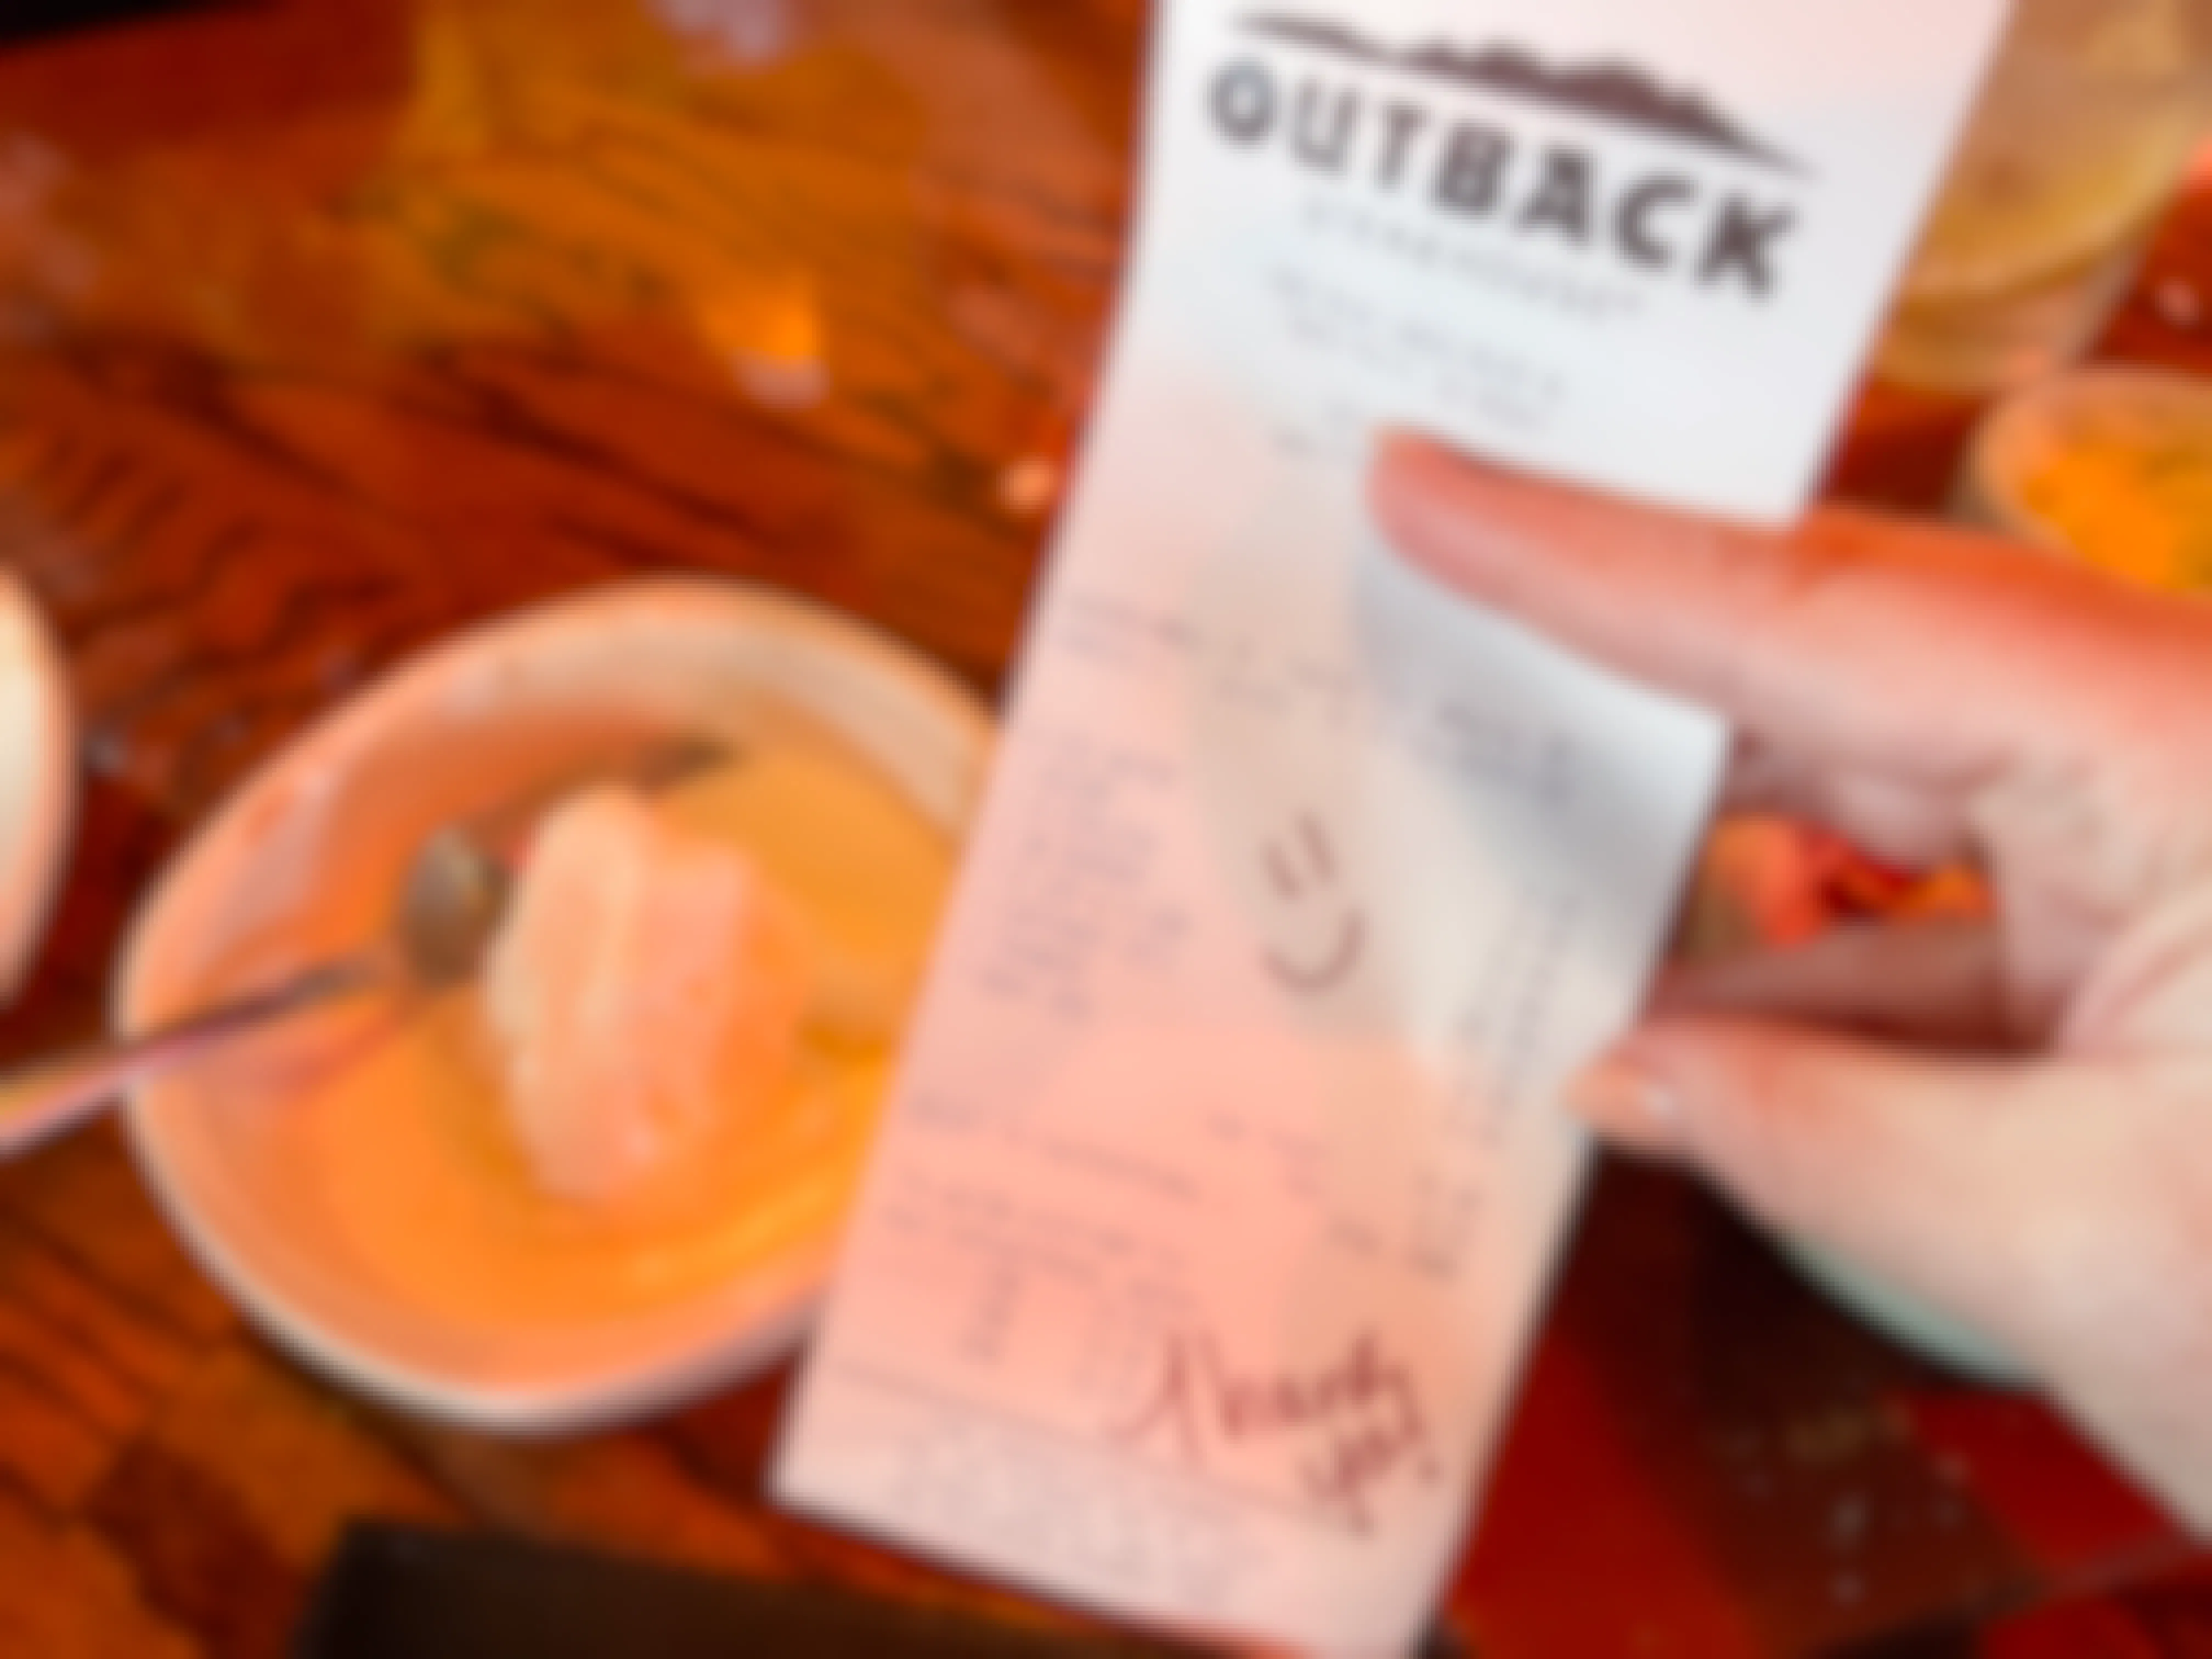 A person's hand holding up an Outback Steakhouse receipt with a free birthday item listed next to a bowl of partially eaten ice cream.